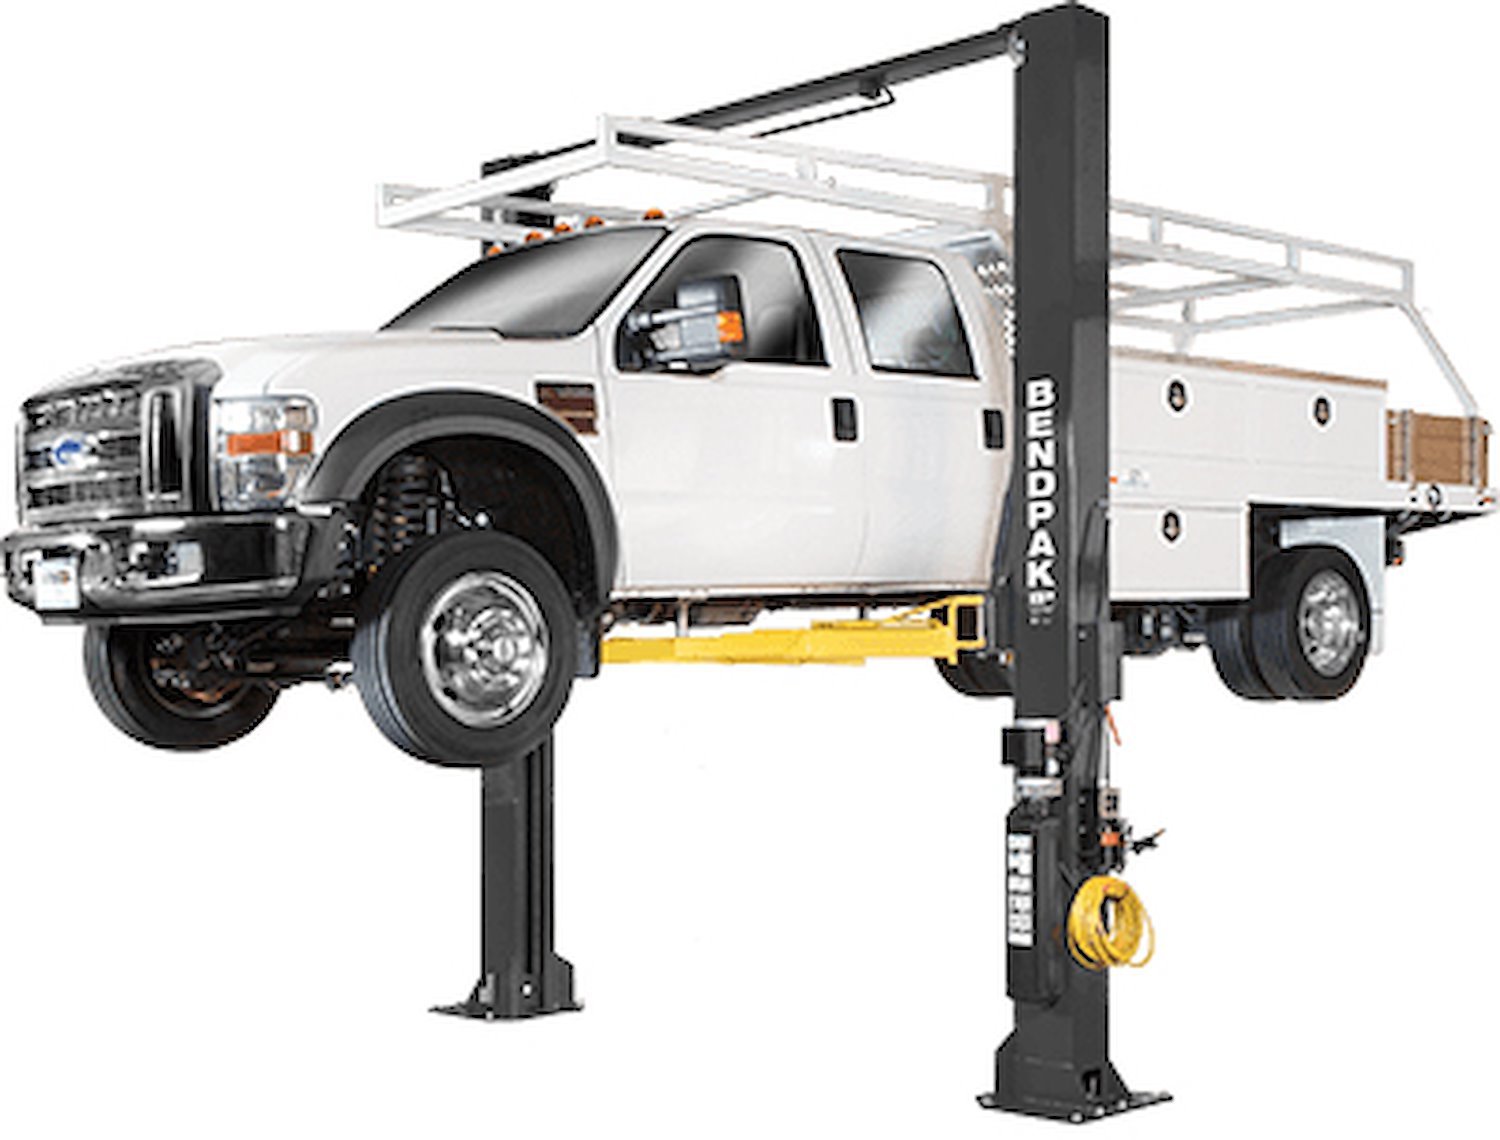 XPR-18CL Standard Two-Post Lift, 18,000-lb. Capacity